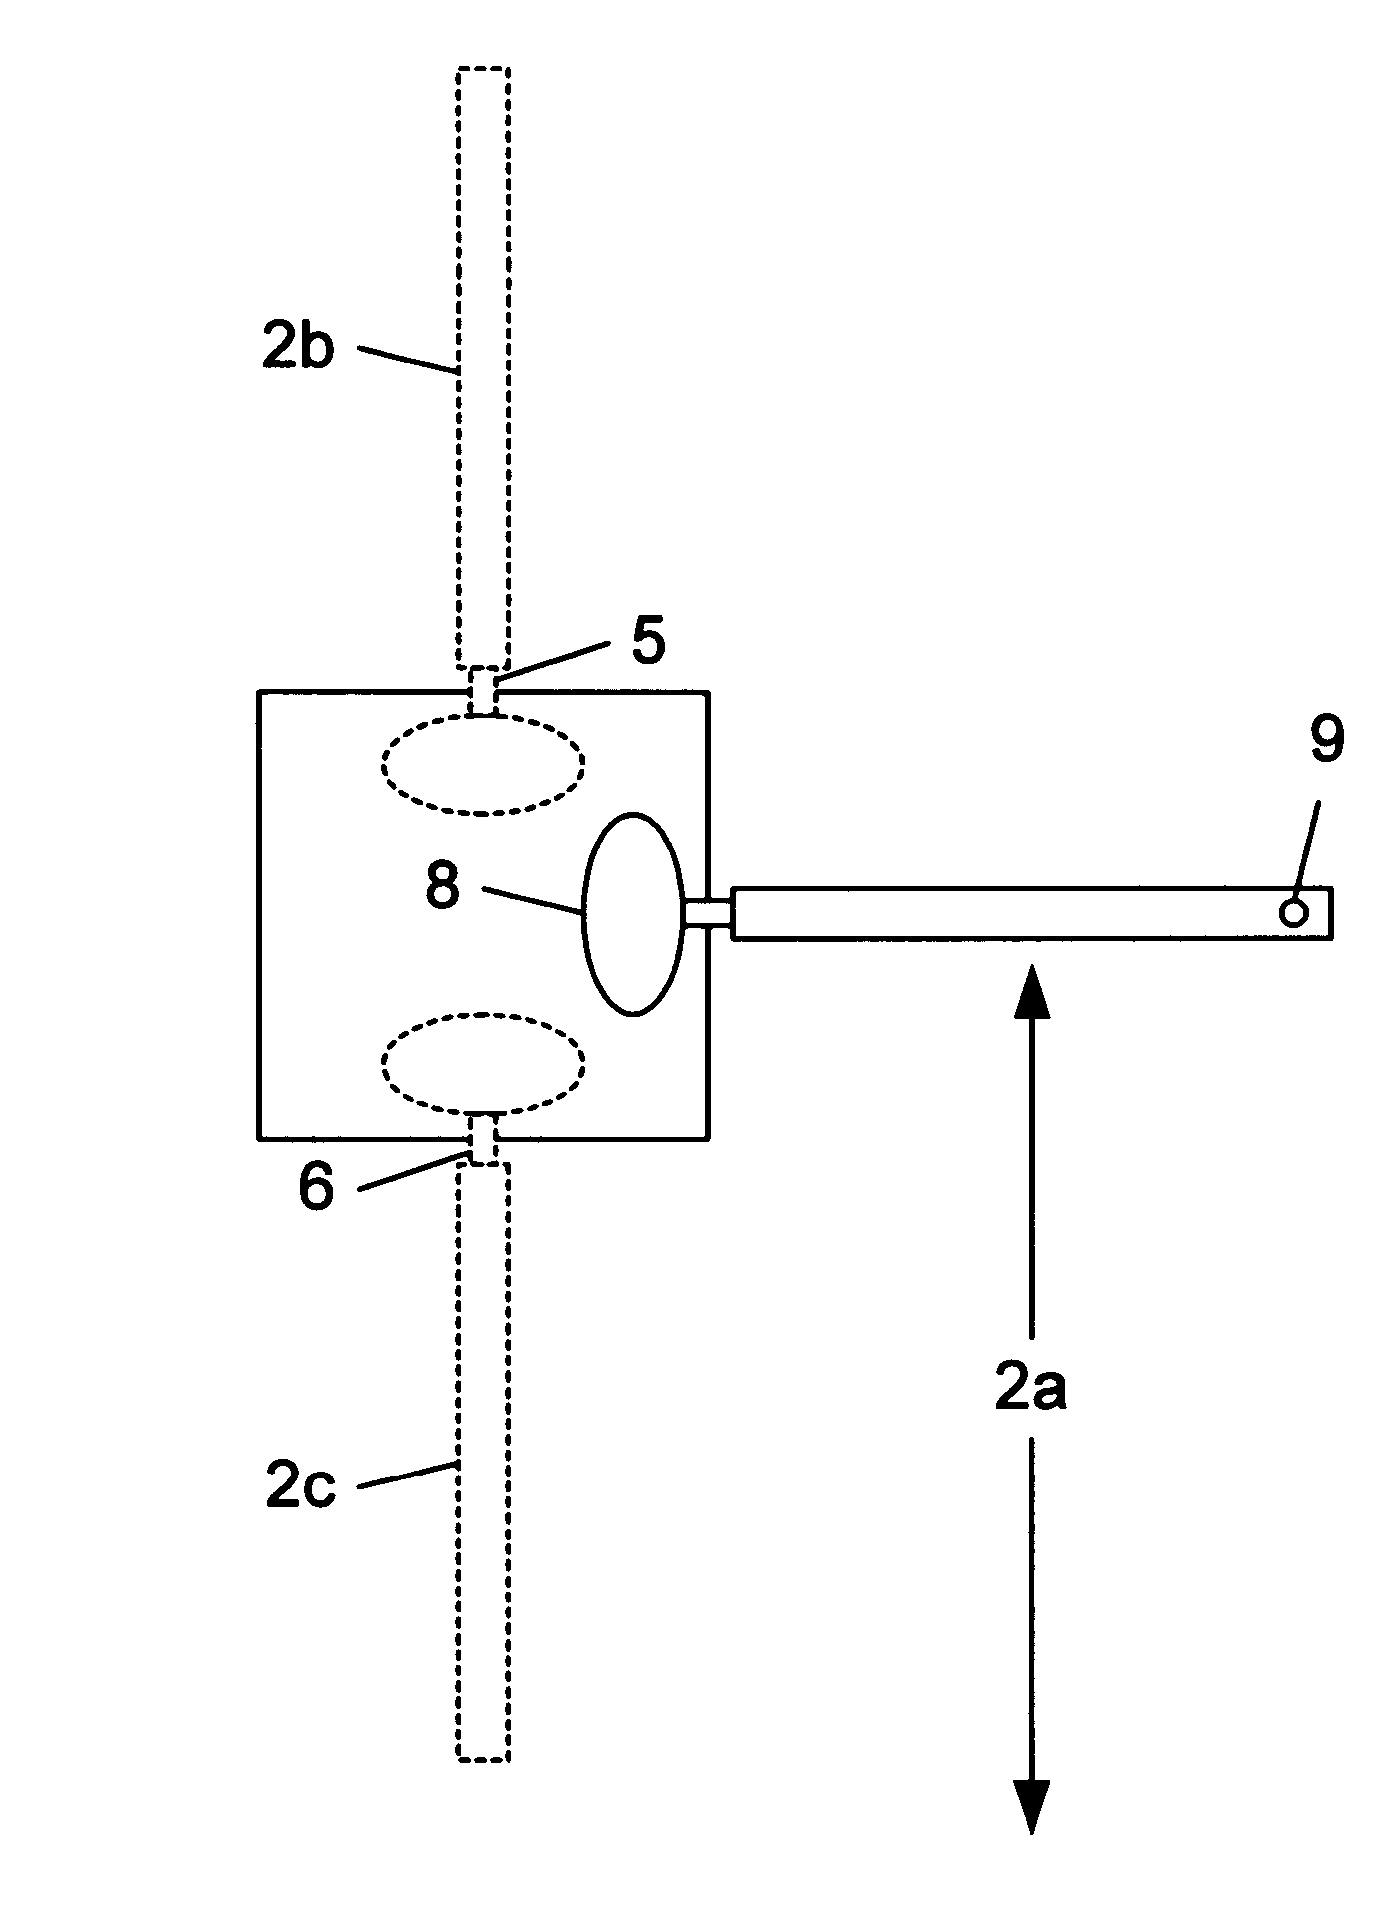 System for sorting multiple semiconductor wafers